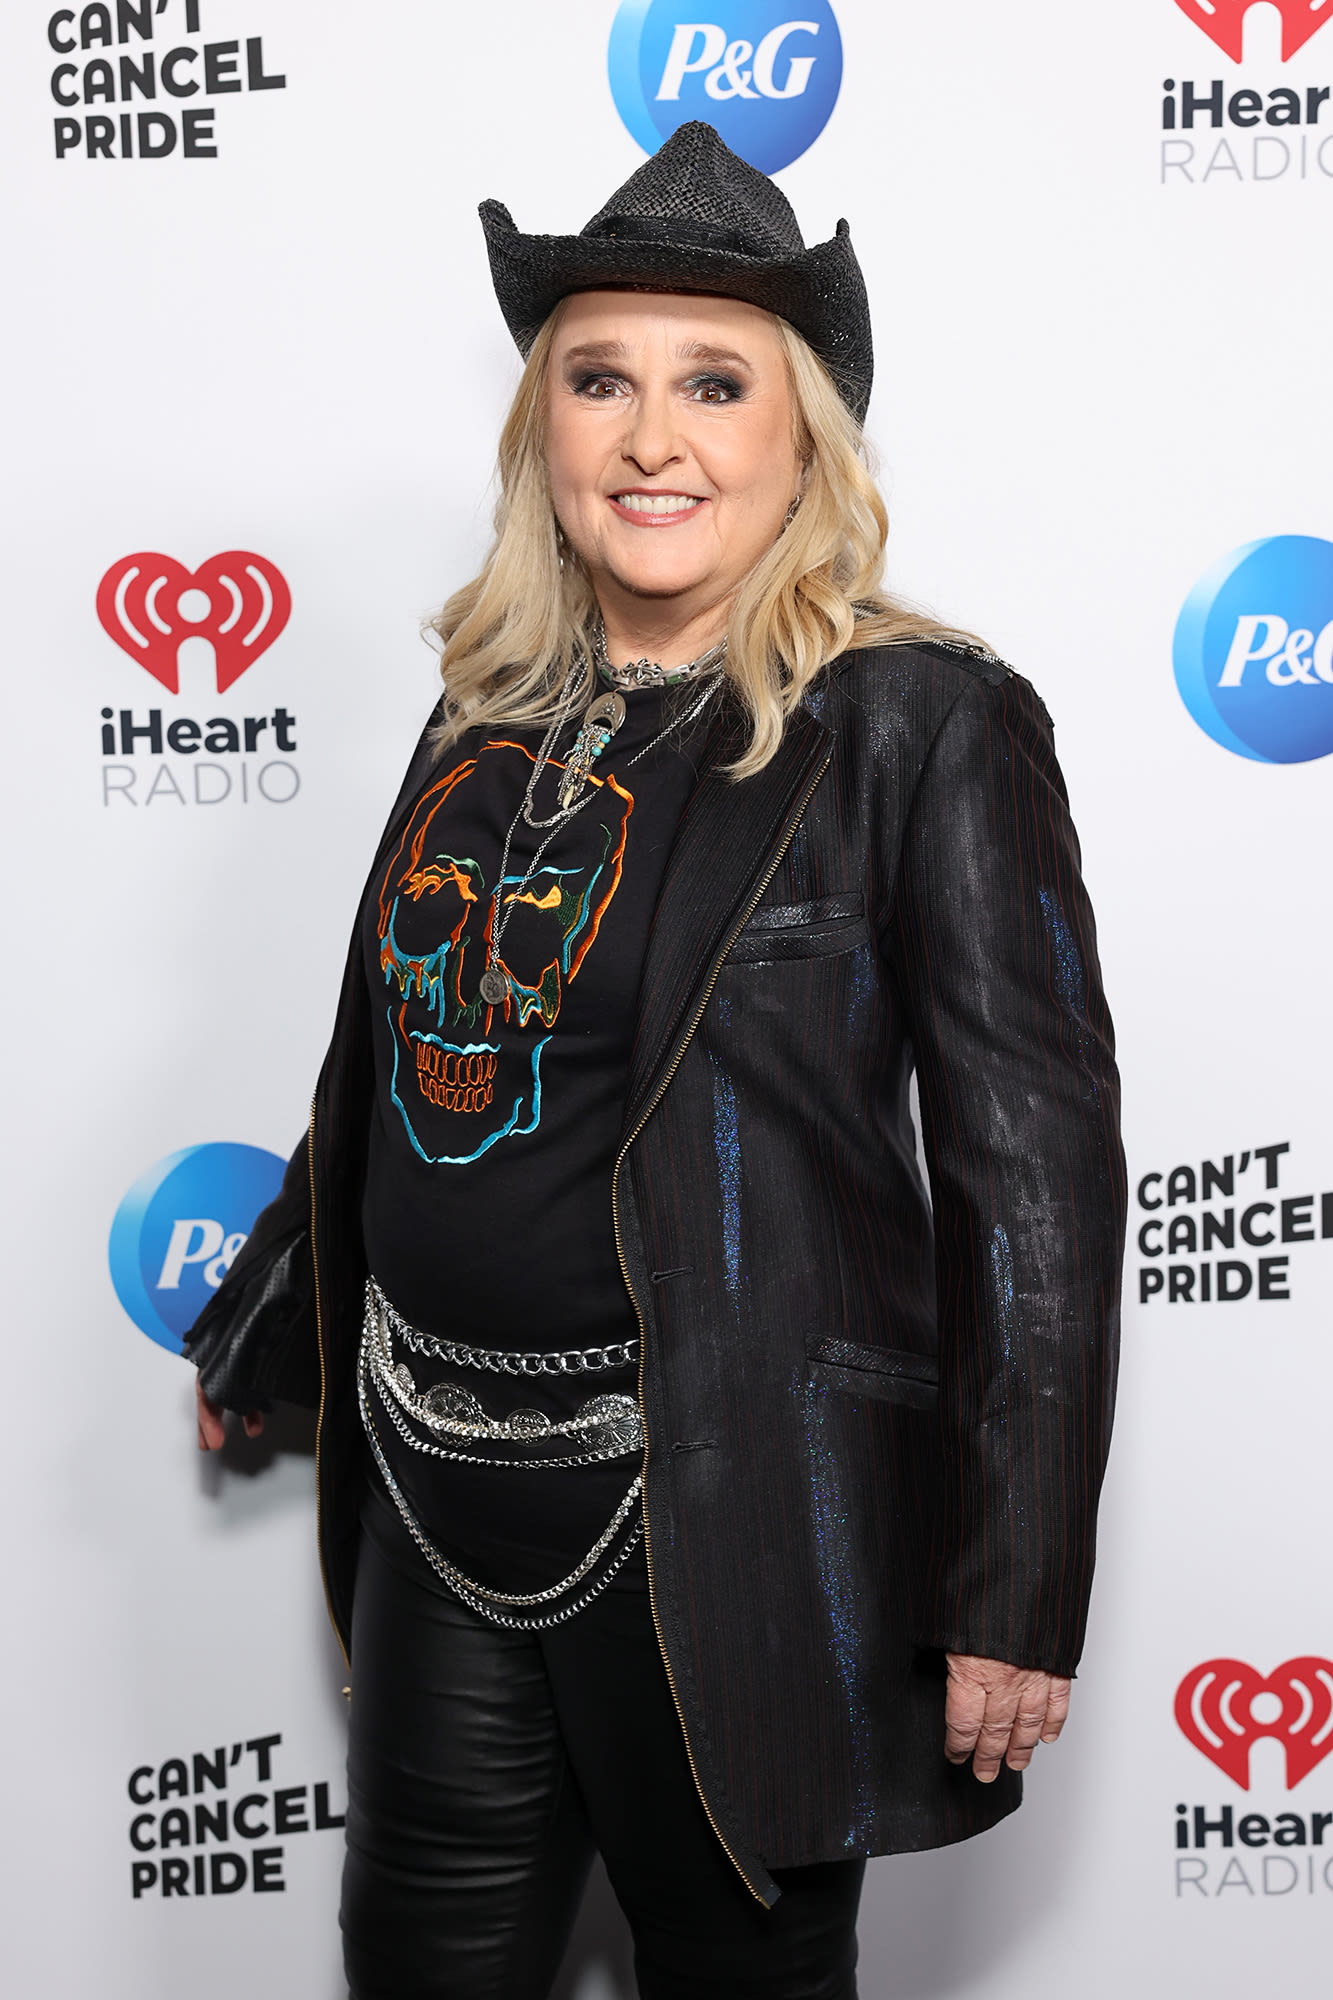 Melissa Etheridge Reflects on Coming Out During Bill Clinton’s Inauguration: ‘Bam, There It Was’